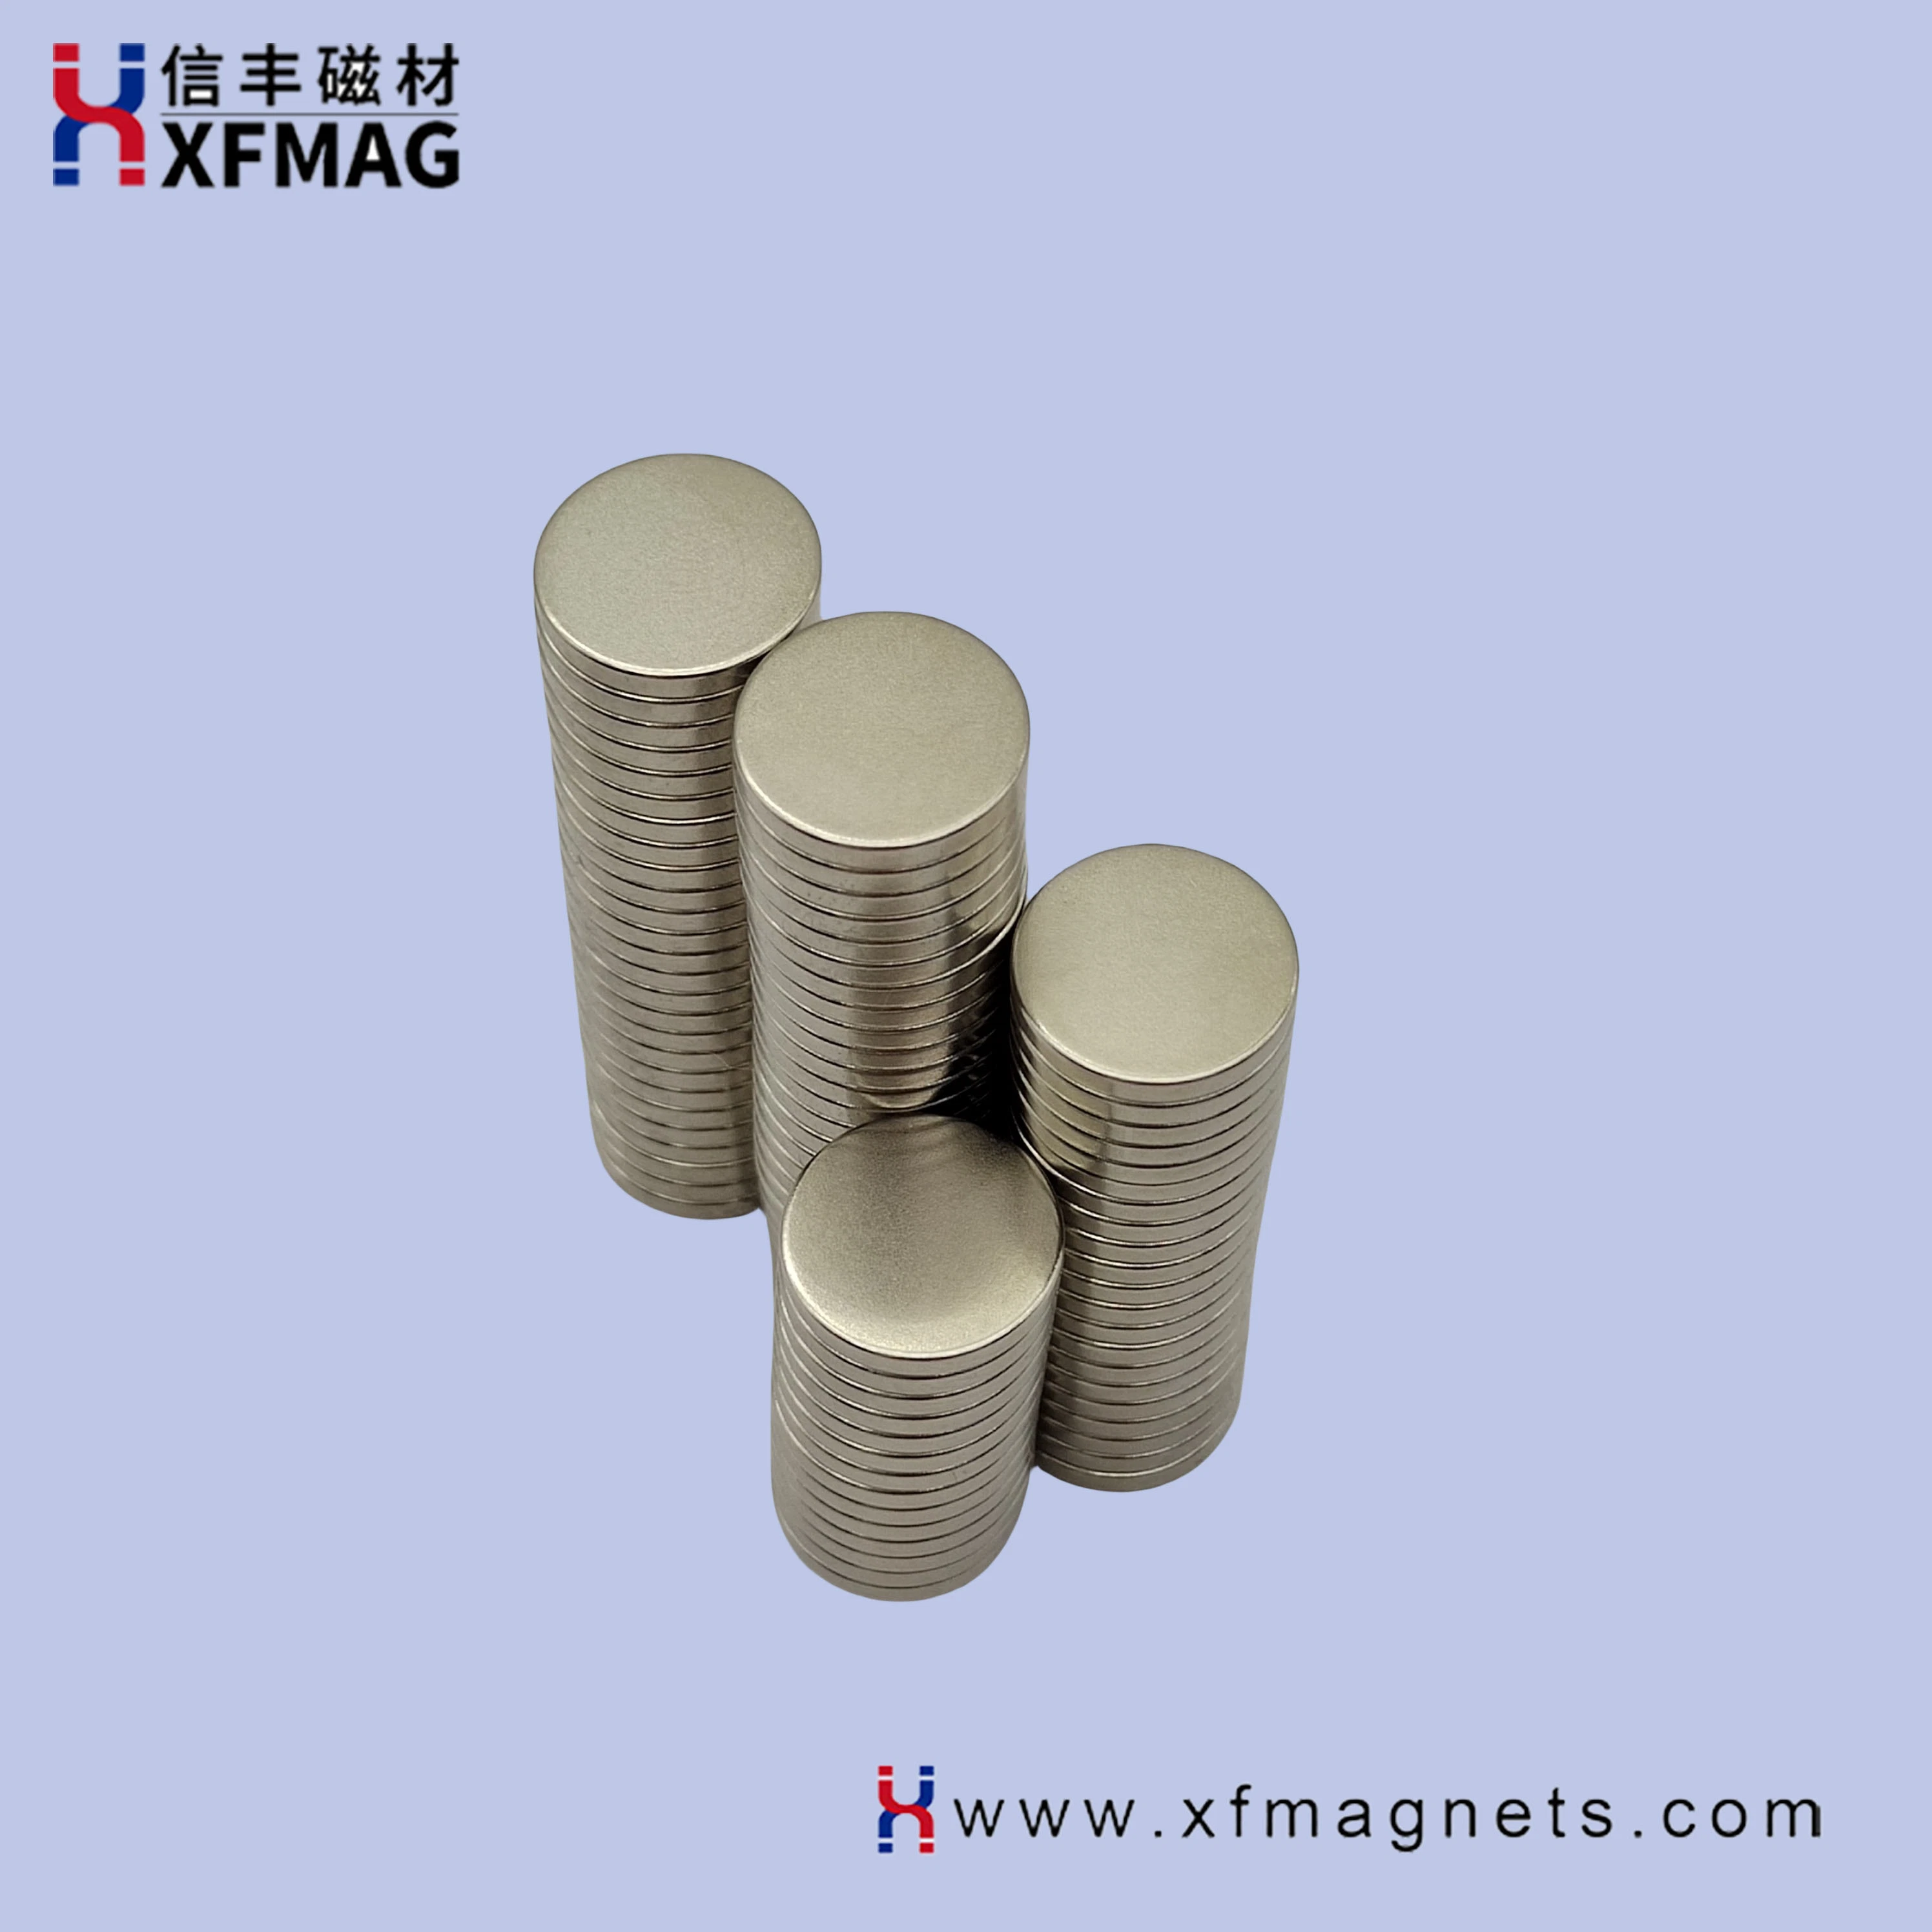 Strong Cylinder Nickel D5*0.5 NdFeB Rare Earth N45 Permanent Disc Neodymium Sintered Magnetic Magnet